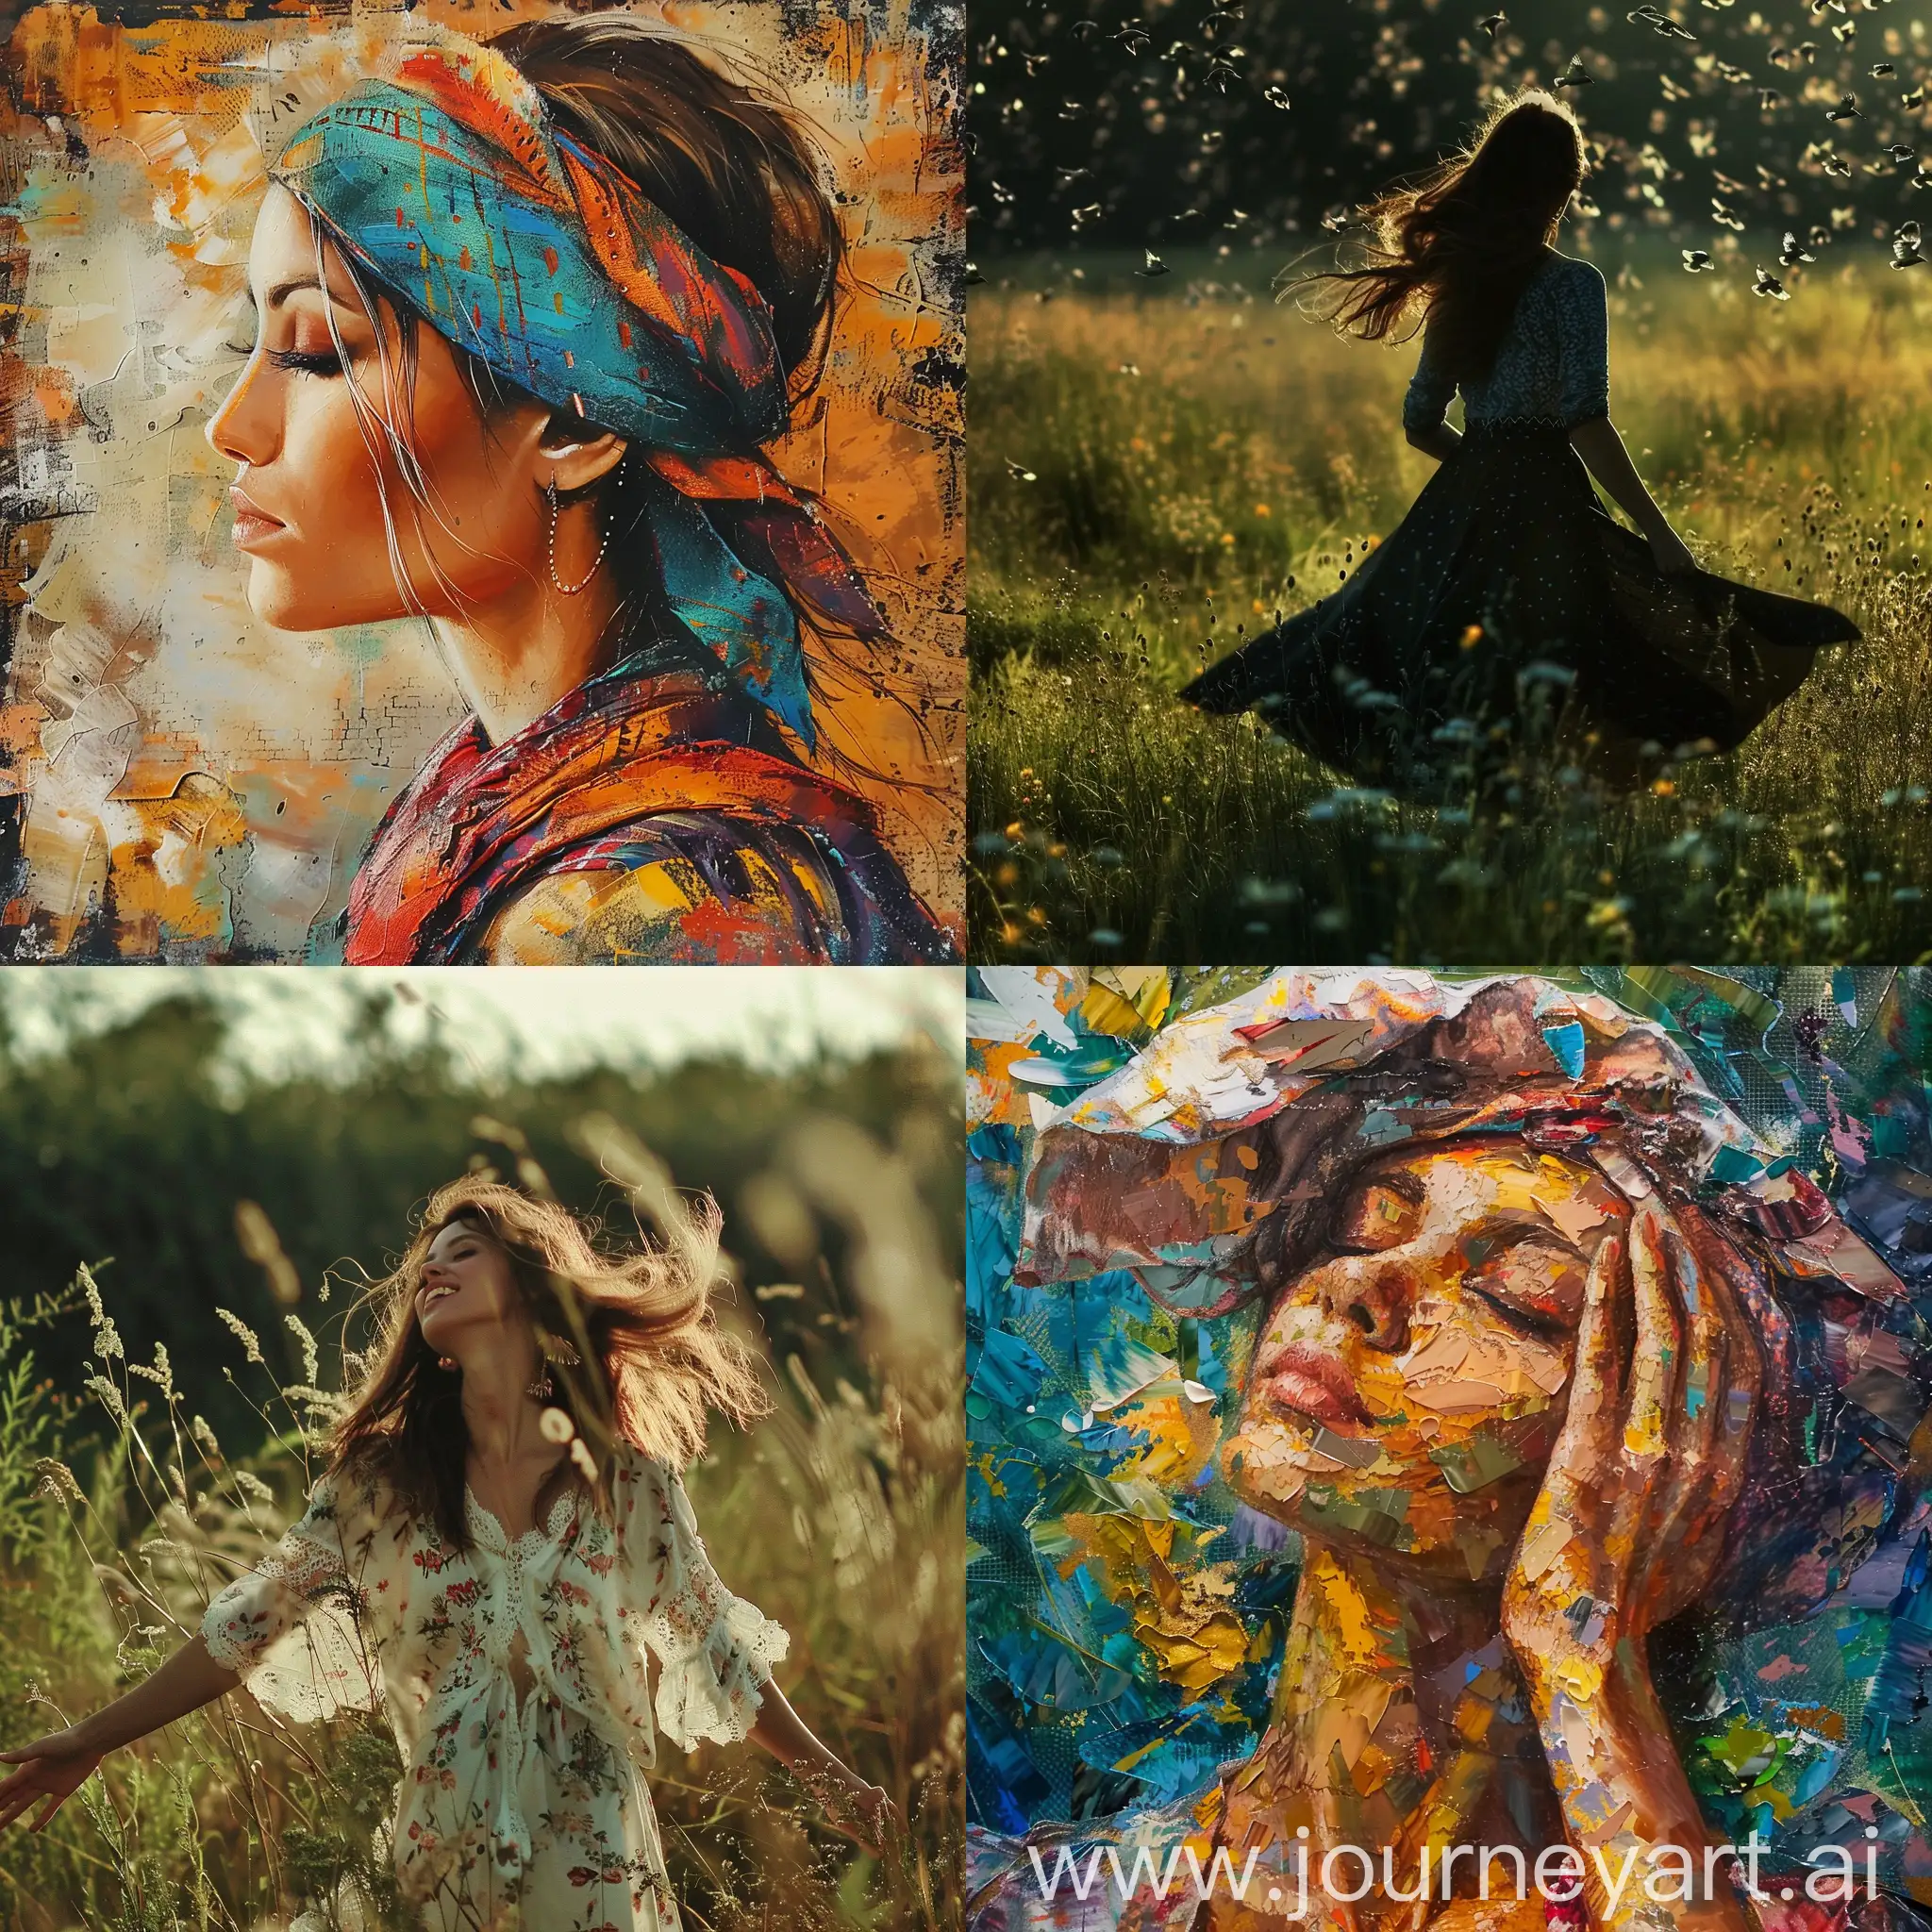 Vibrant-Woman-Embracing-Freedom-in-a-Surreal-Landscape